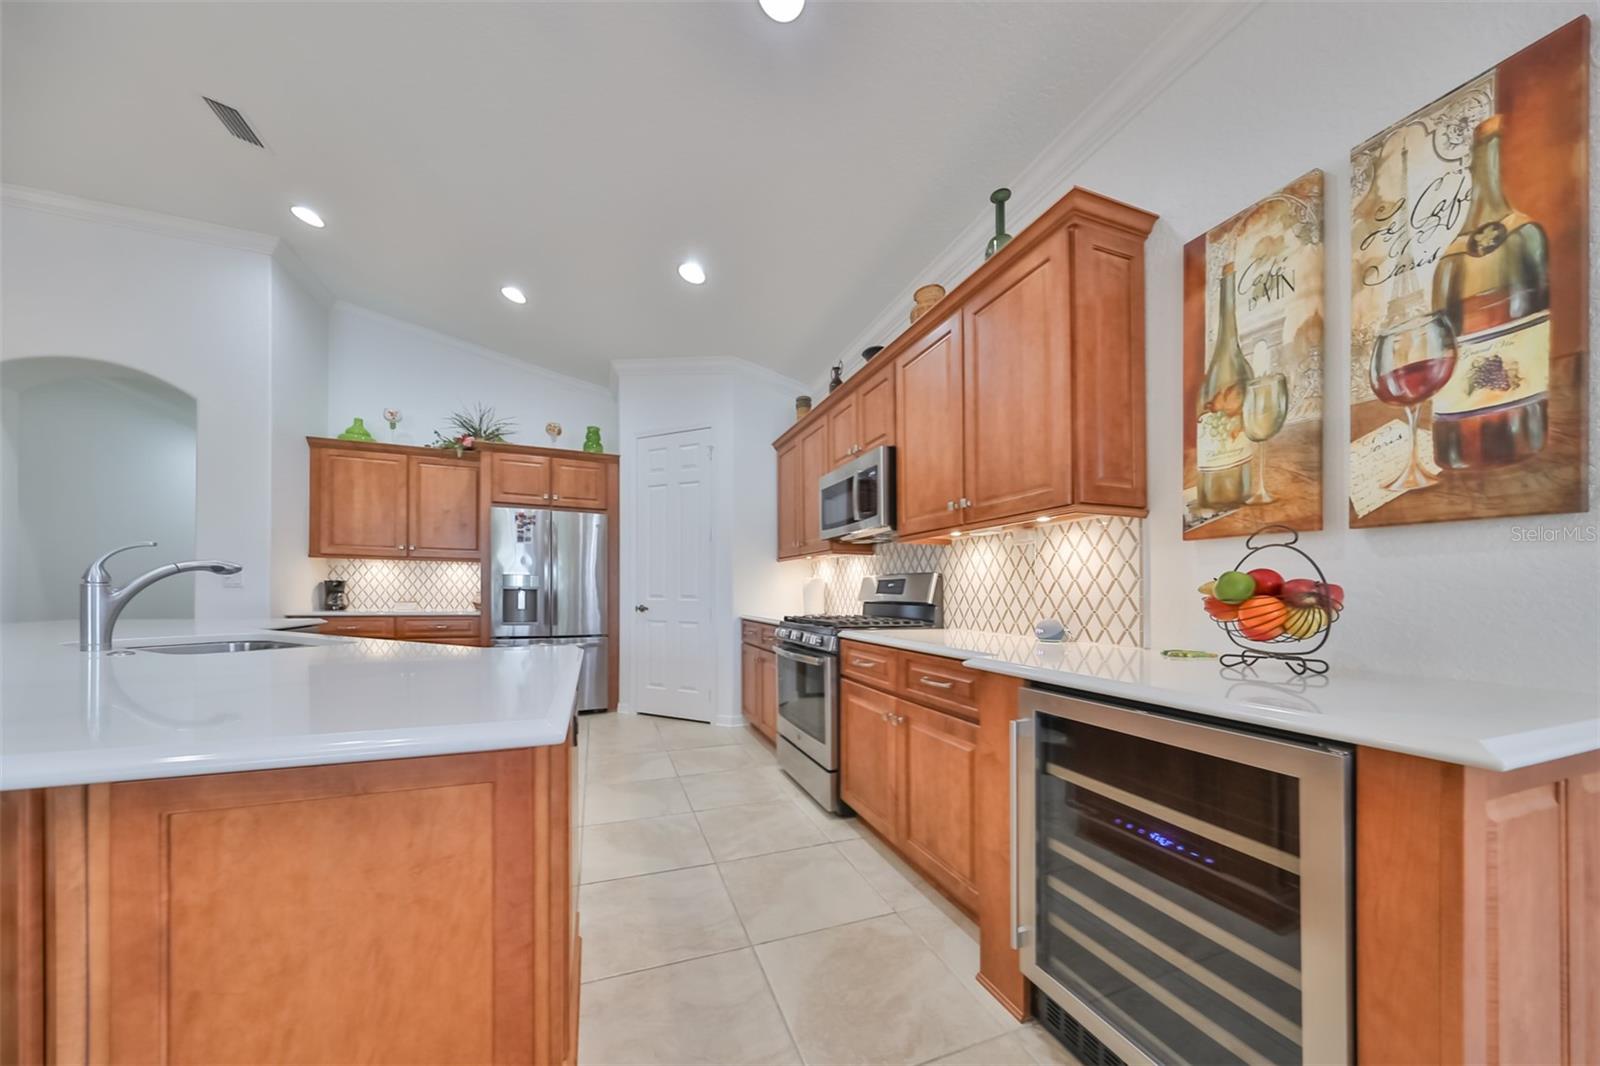 Kitchen with all wood cabinets and undermounted lighting, as well as a temperature controlled wine cooler are just a few of the extraordinary touches in this condo.